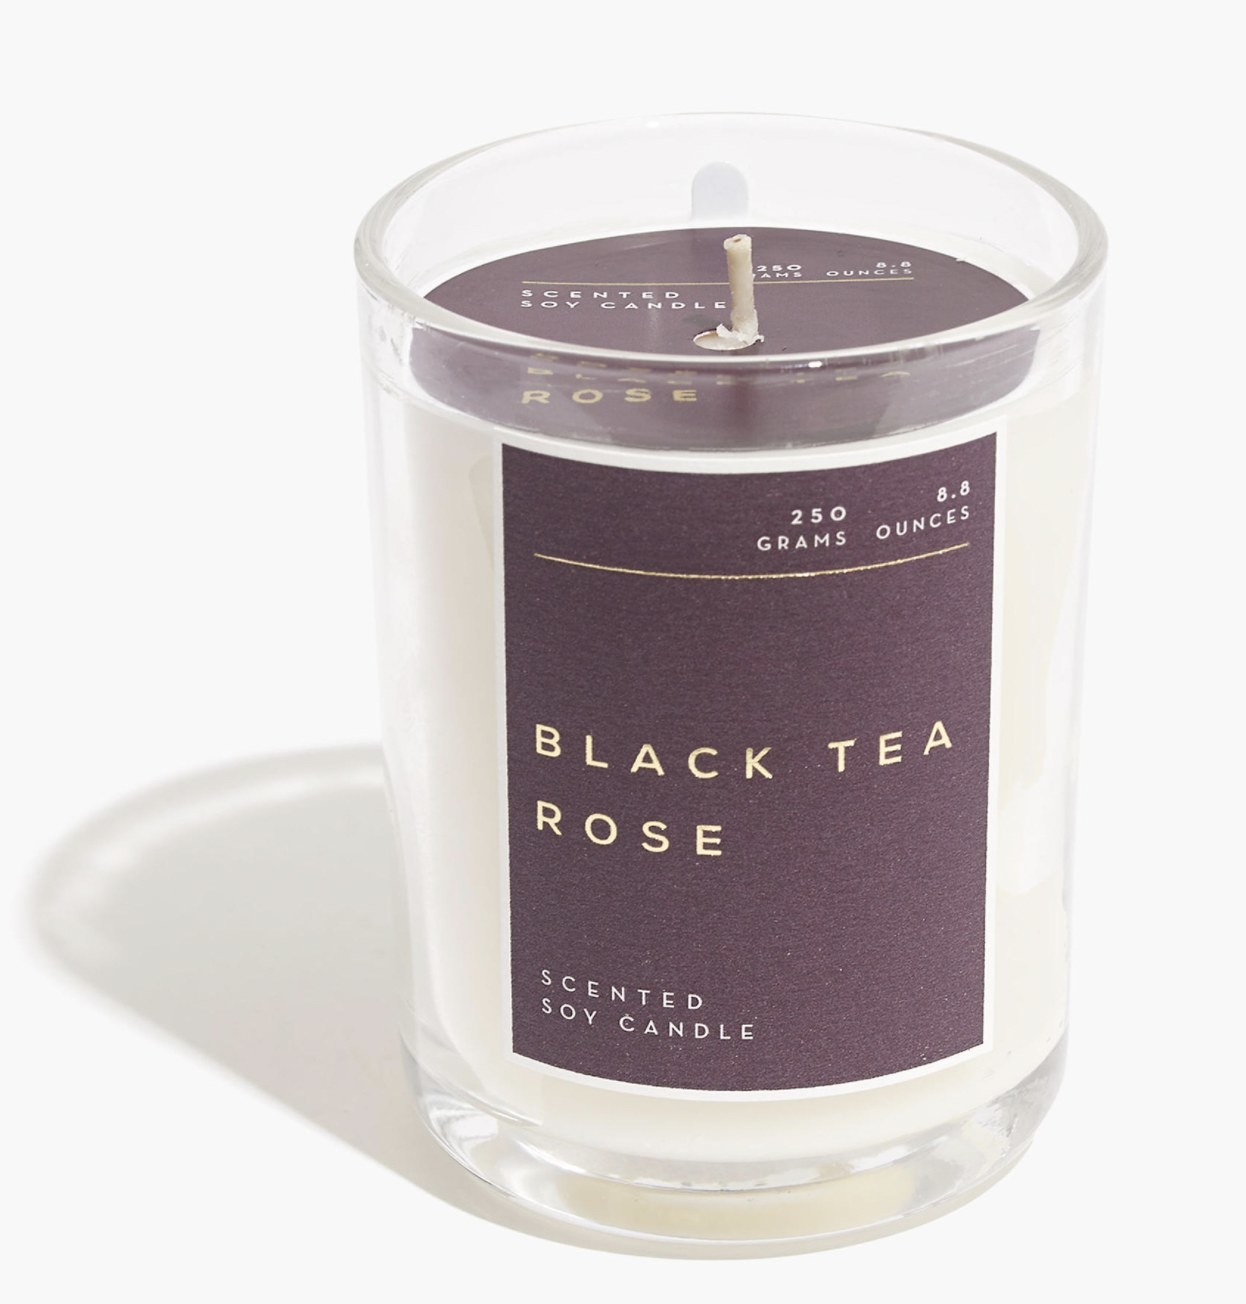 the black tea rose candle with a purple label